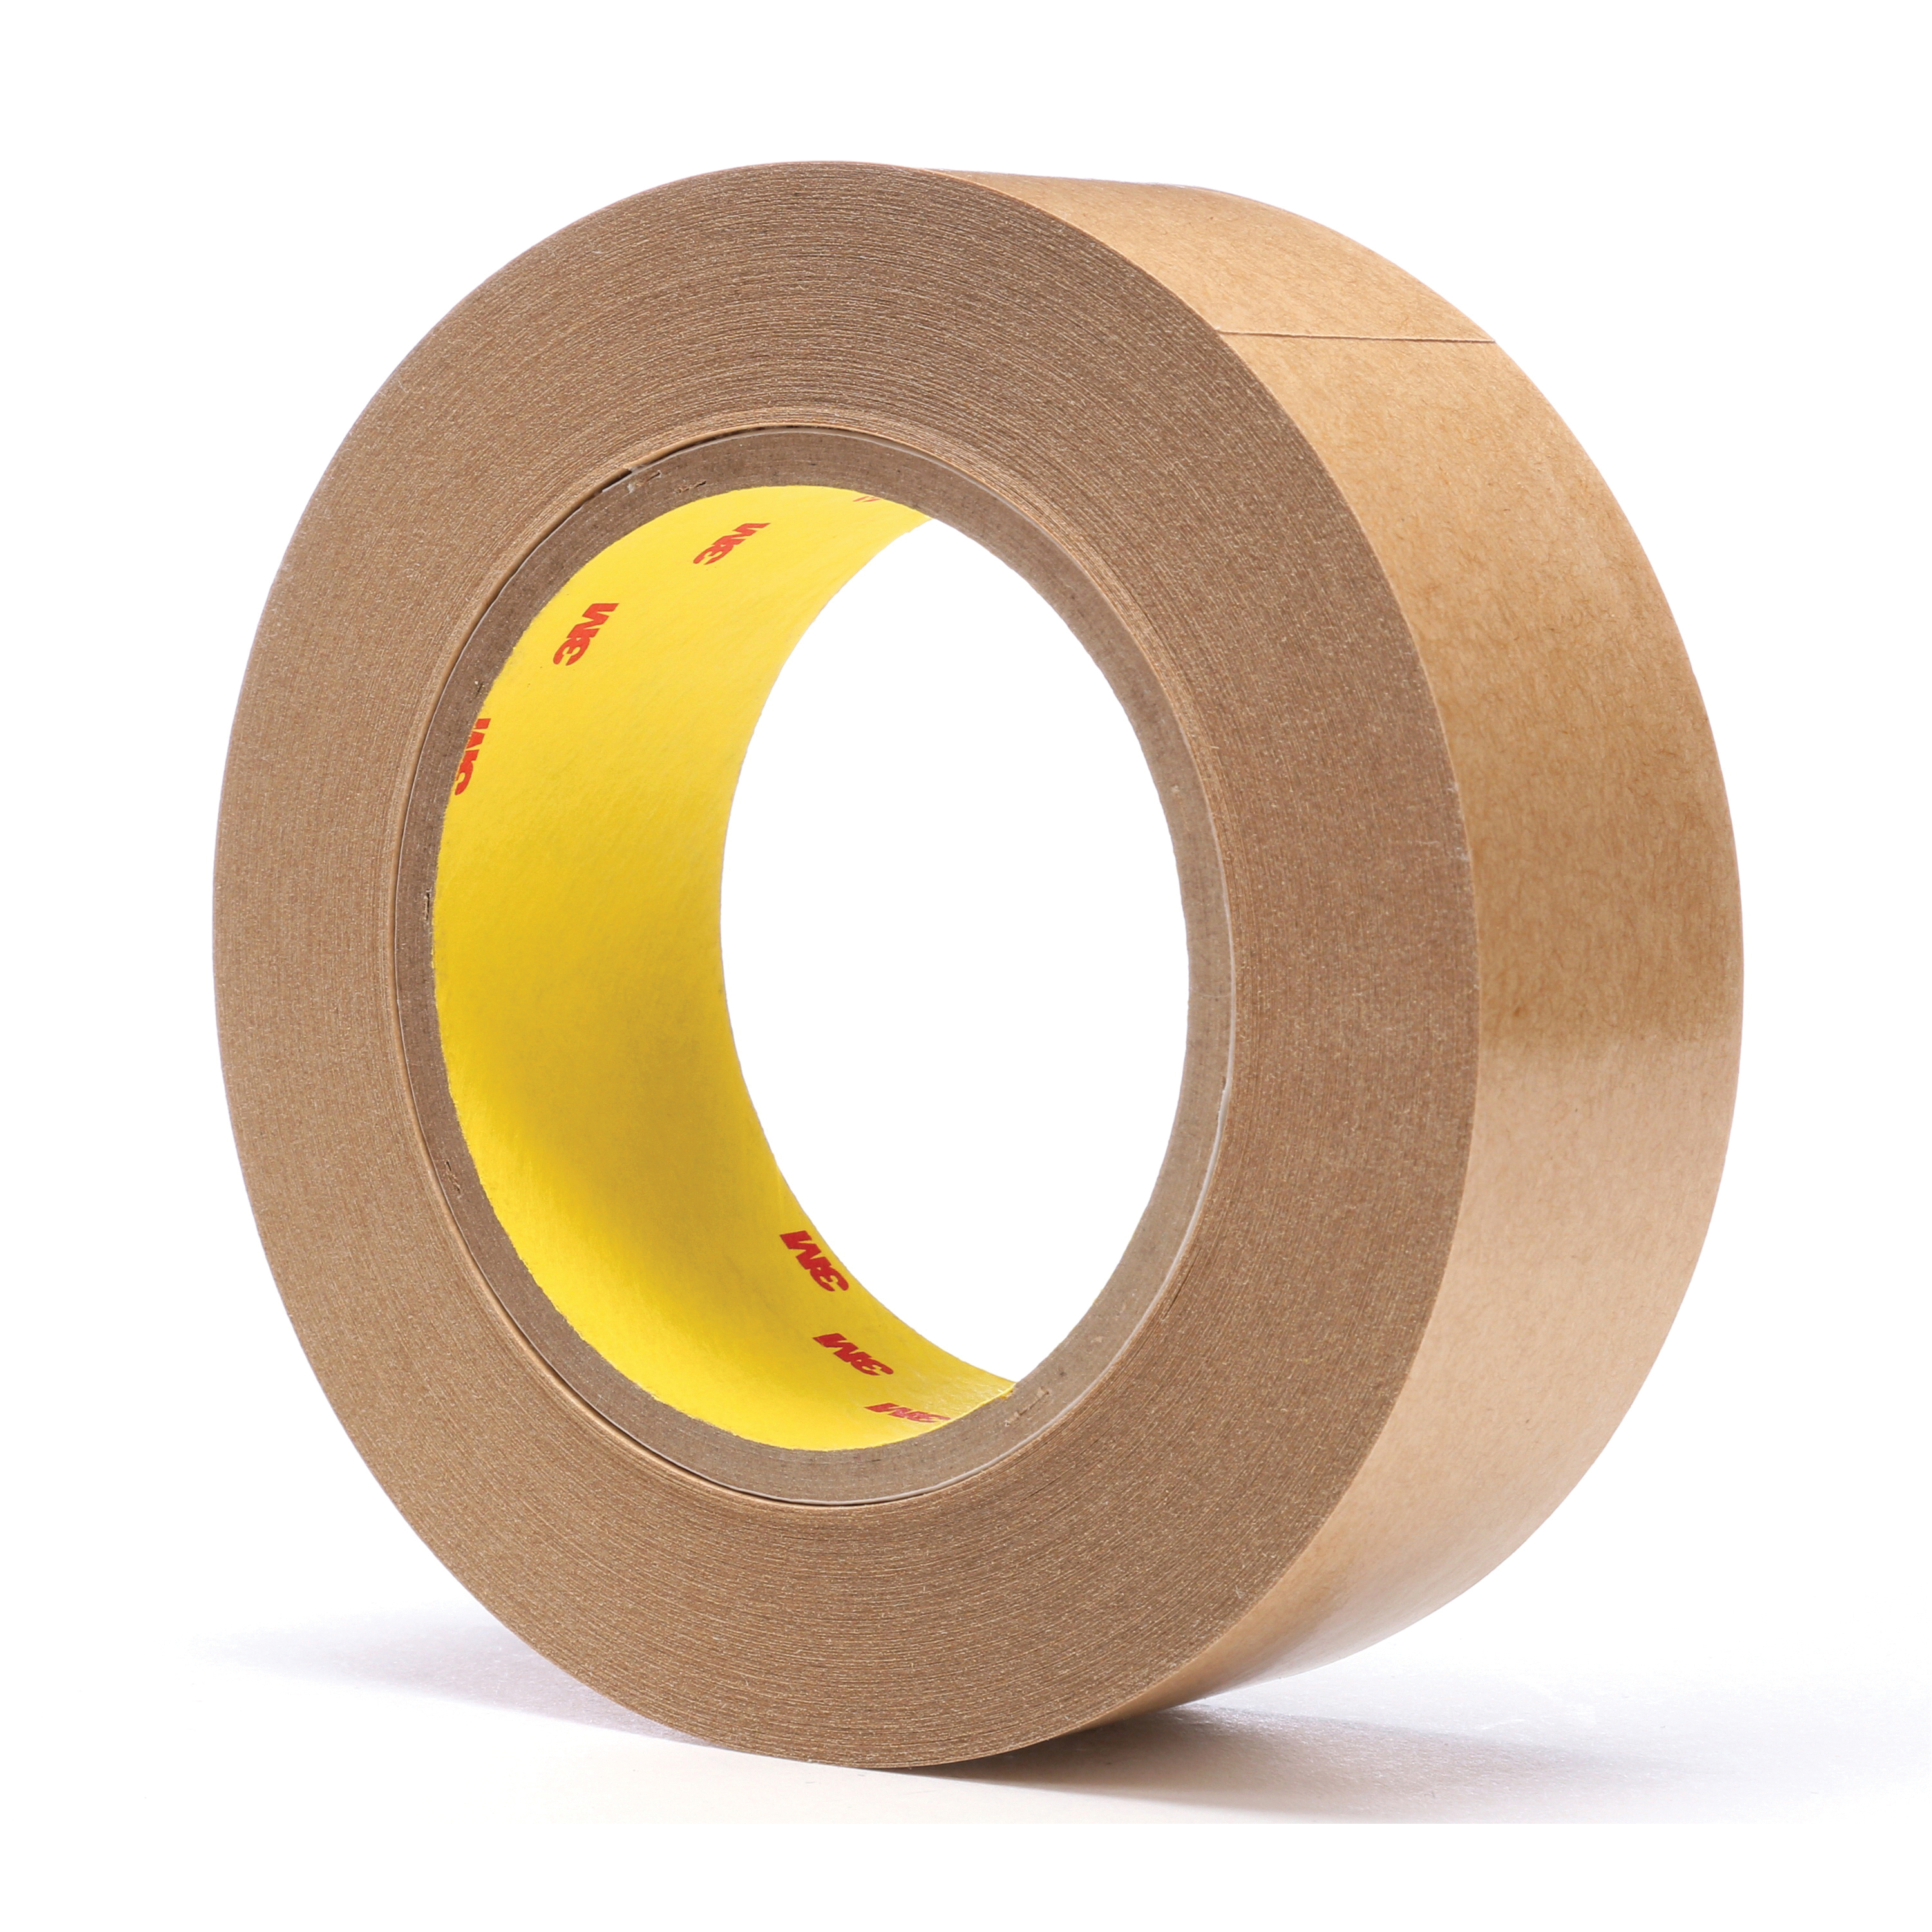 3M™ 021200-03338 Fibered General Purpose Adhesive Transfer Tape, 60 yd L x 1-1/2 in W, 2 mil THK, 2 mil 400 Acrylic Adhesive, Clear